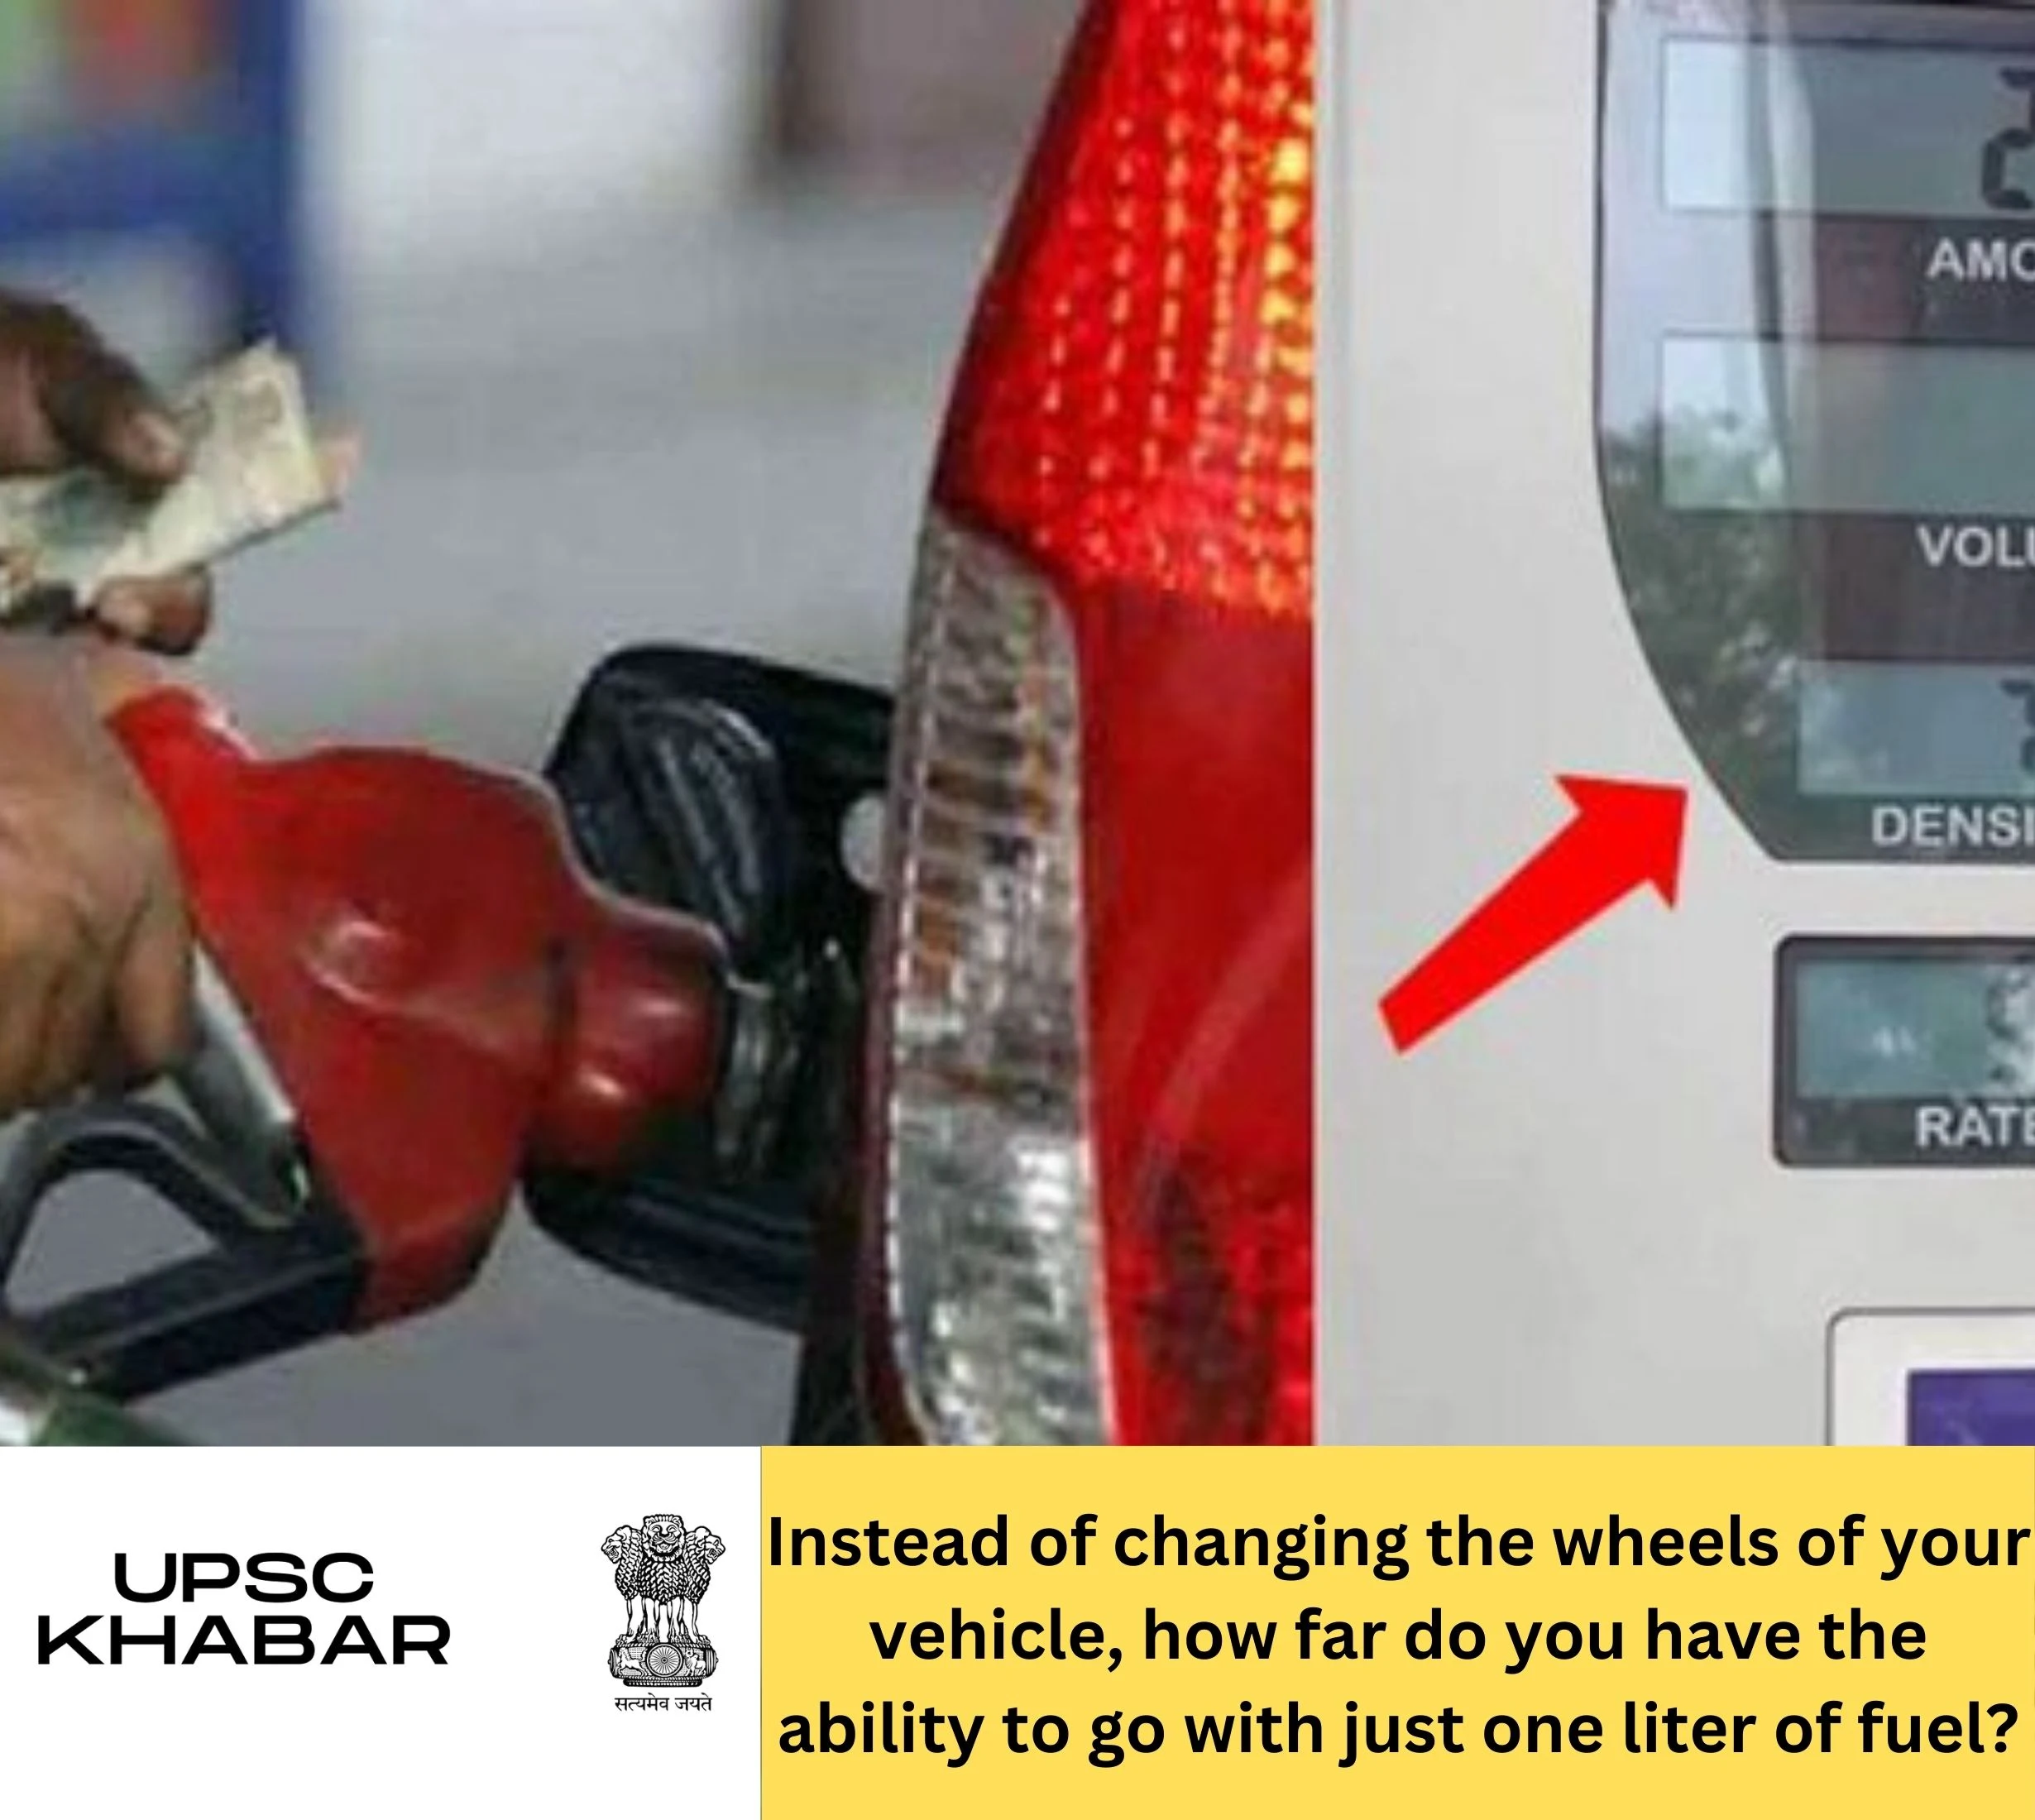 Instead of changing the wheels of your vehicle, how far do you have the ability to go with just one liter of fuel?